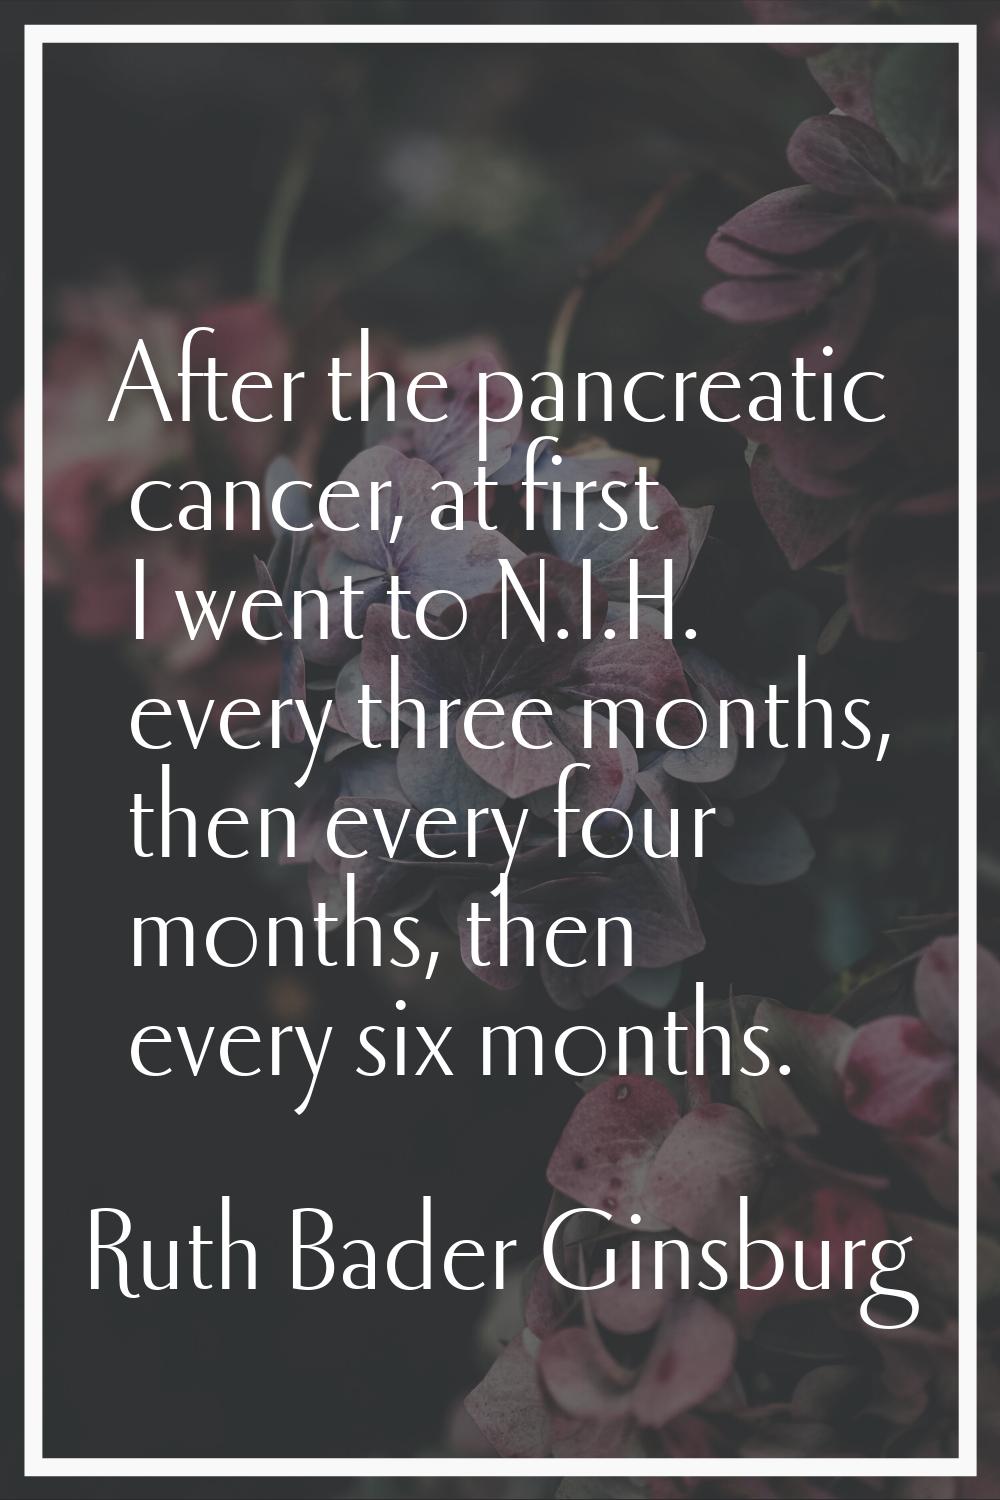 After the pancreatic cancer, at first I went to N.I.H. every three months, then every four months, 